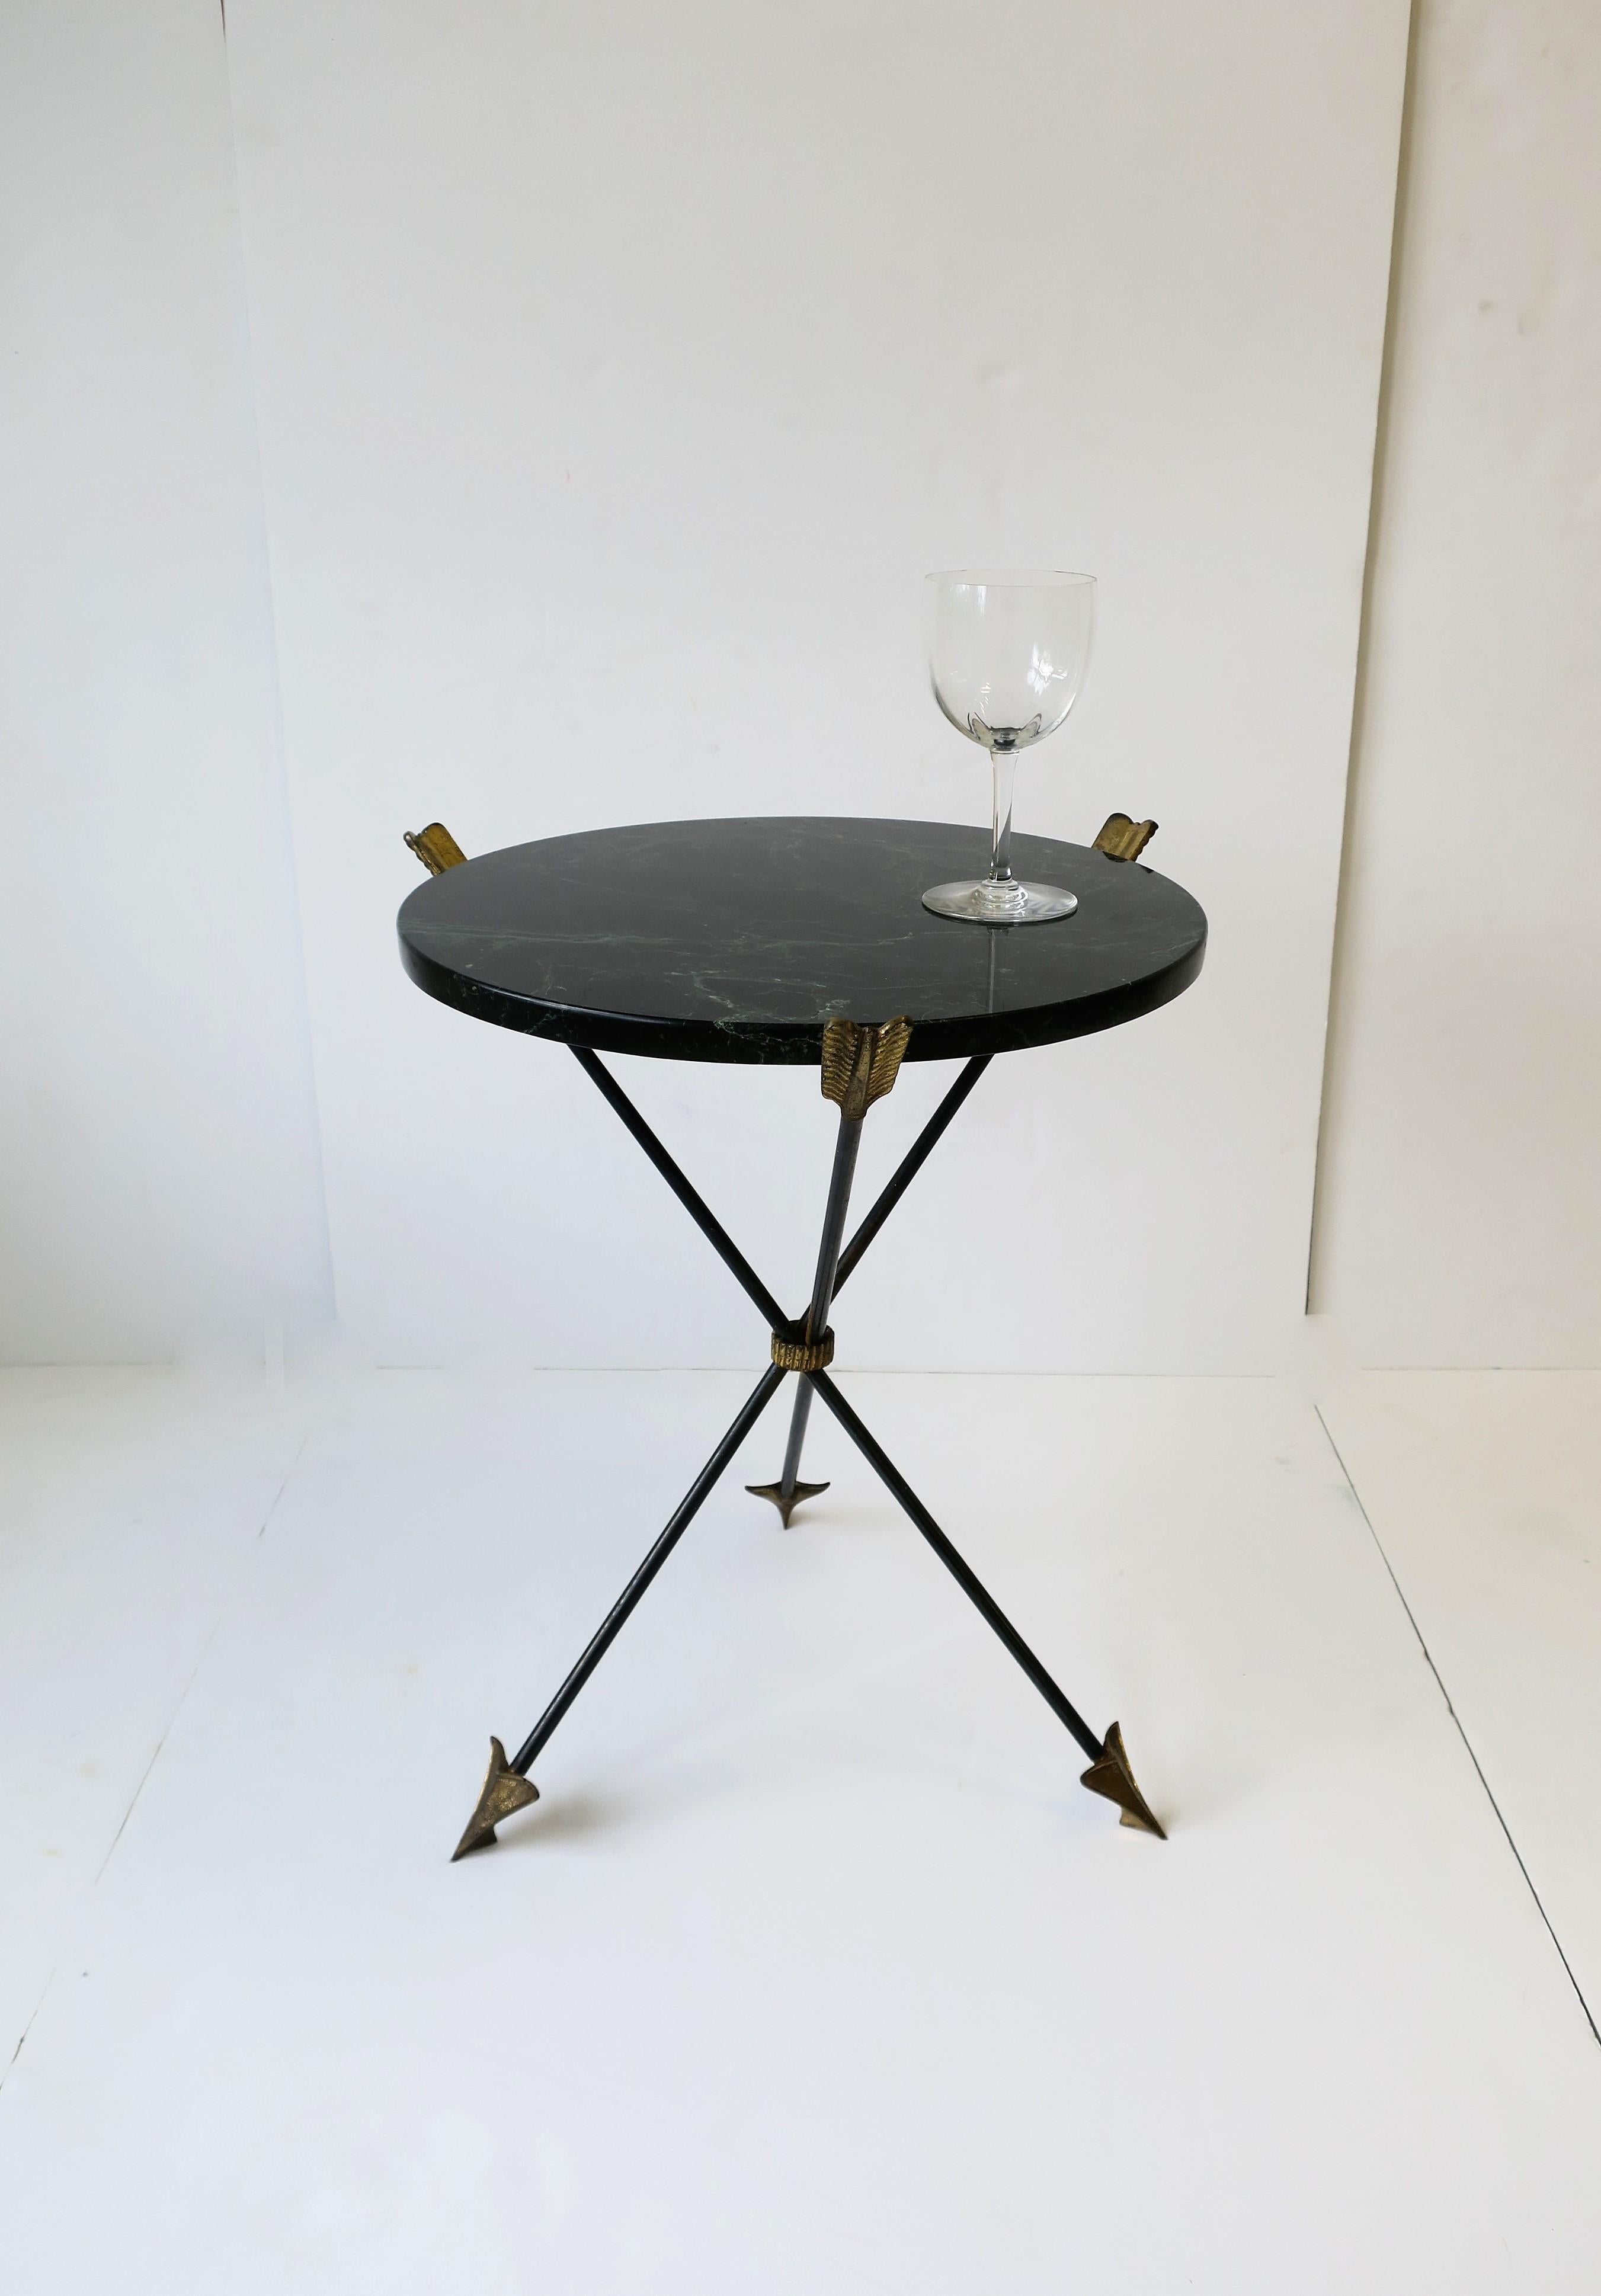 20th Century Italian Neoclassical Marble and Brass Tripod Side Table or Guéridon